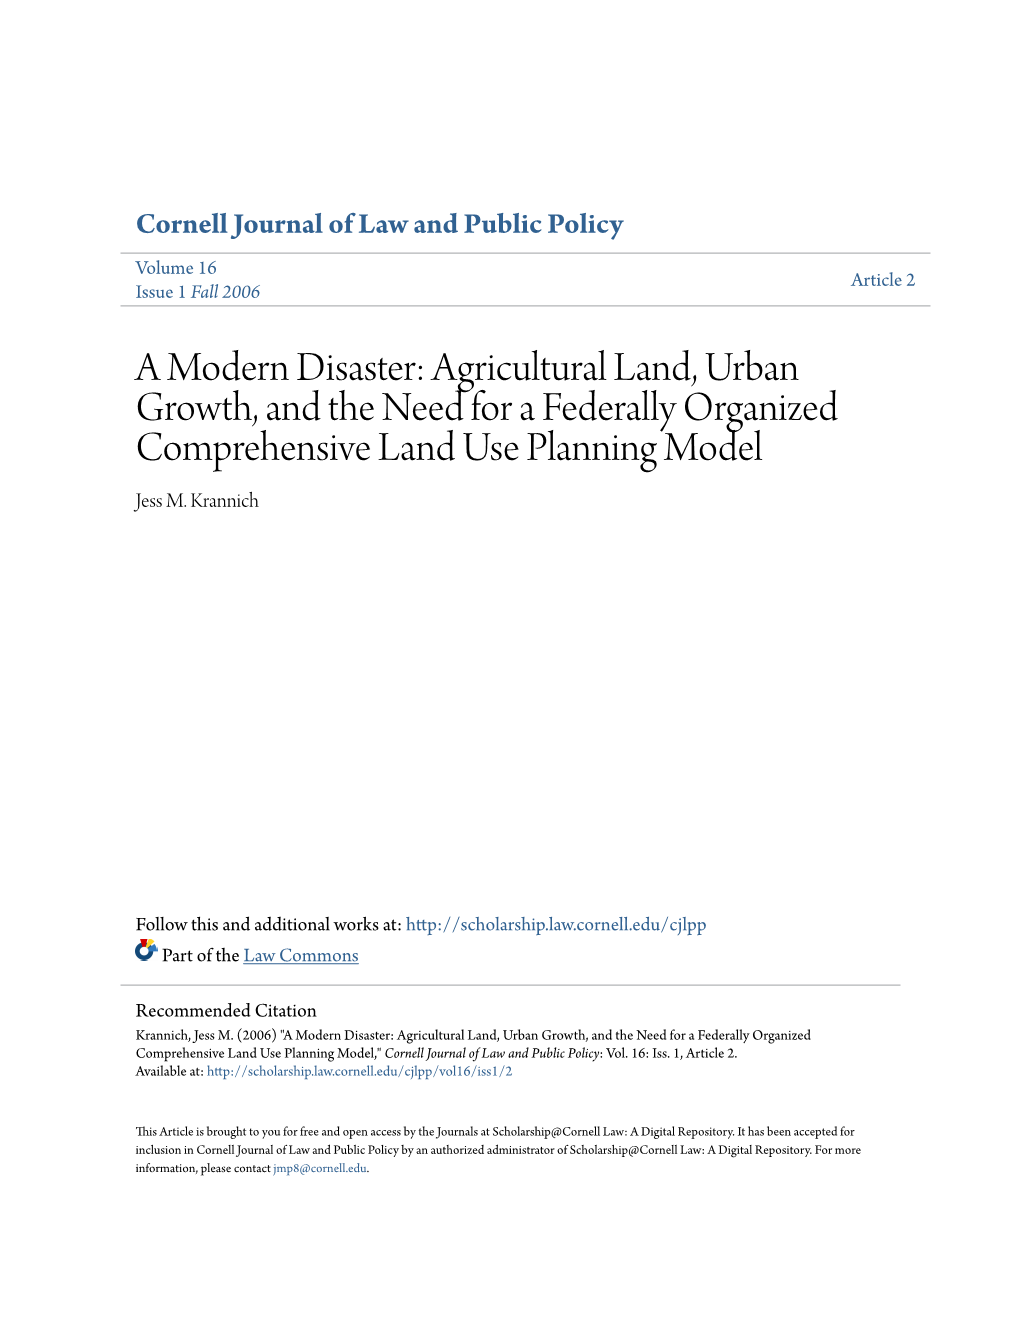 Agricultural Land, Urban Growth, and the Need for a Federally Organized Comprehensive Land Use Planning Model Jess M